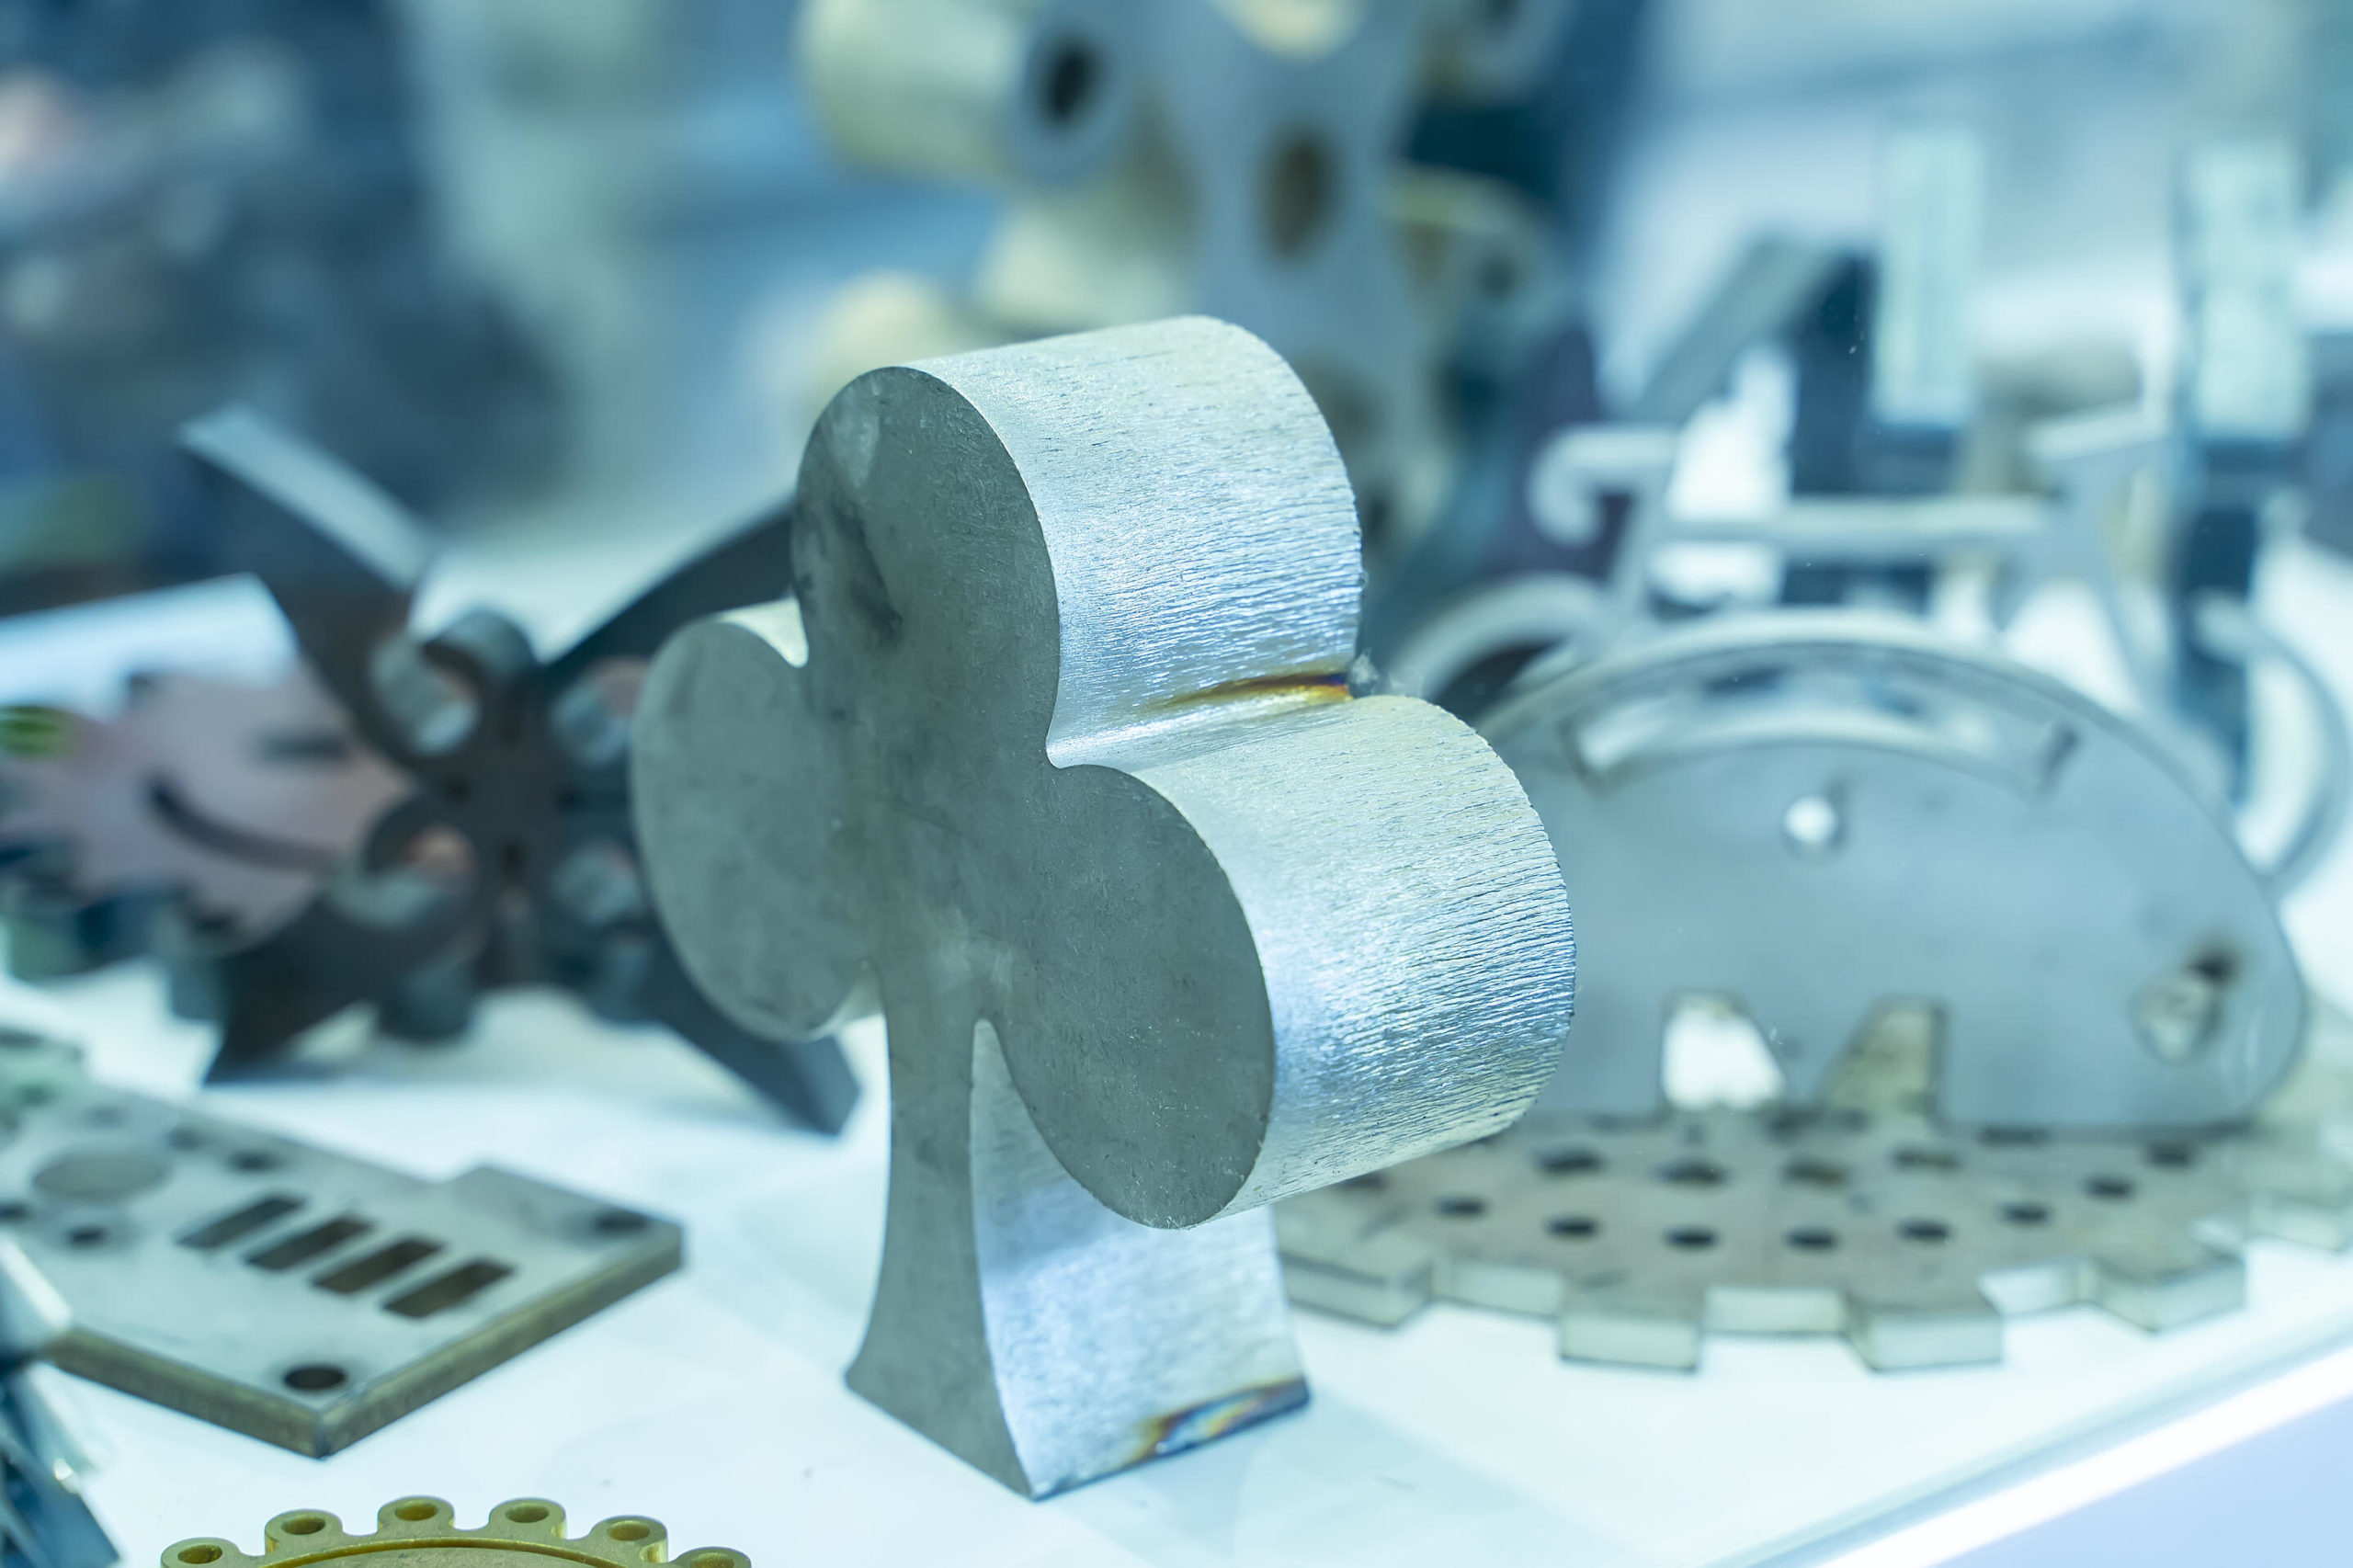 WHAT ARE THE KEY DESIGN DECISION STEPS FOR DIE CASTING?